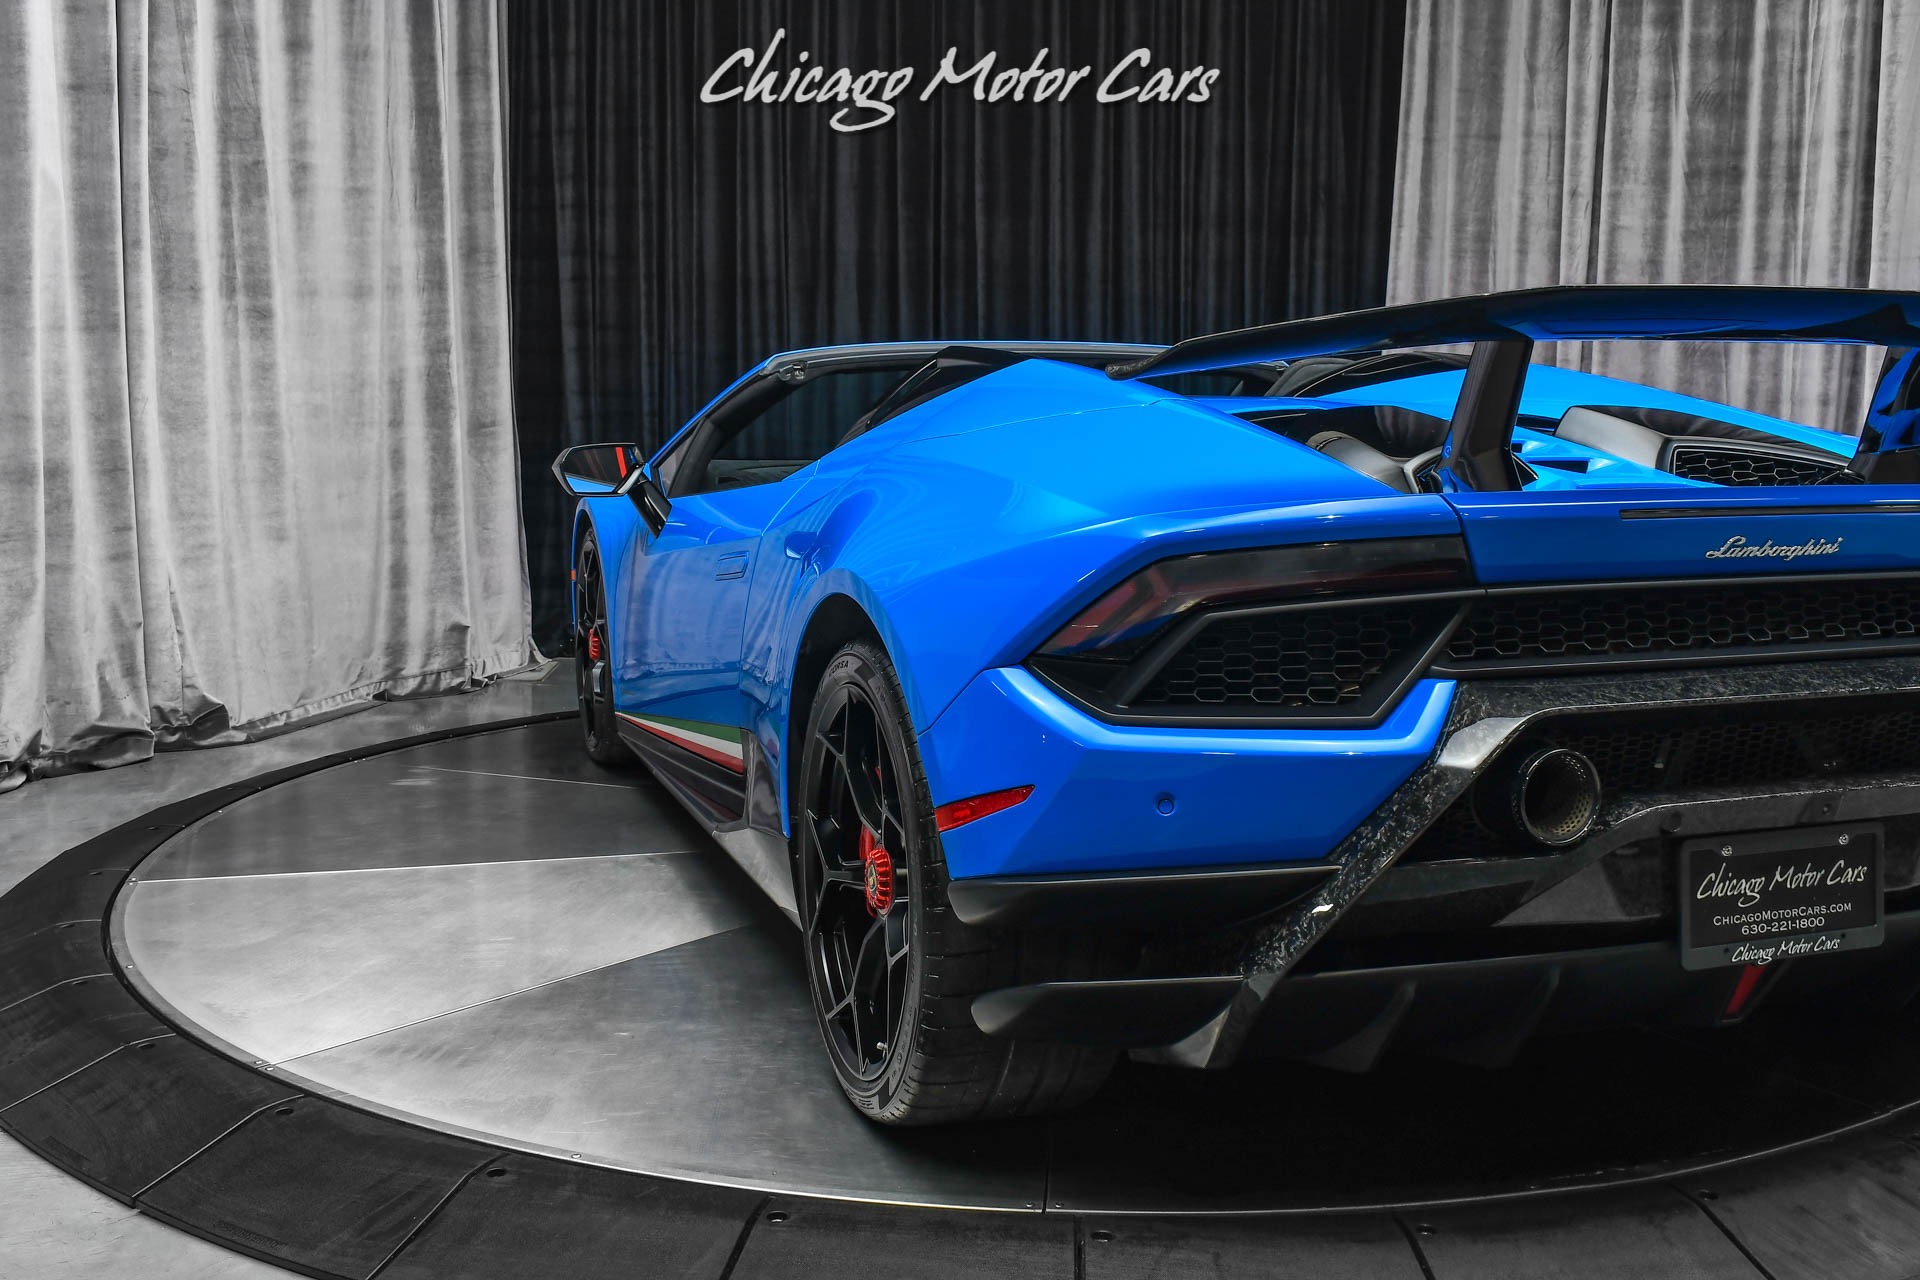 Used-2018-Lamborghini-Huracan-Performante-LP640-4-Spyder-Blu-Le-Mans-Style-Package-Lifting-System-FULL-PPF